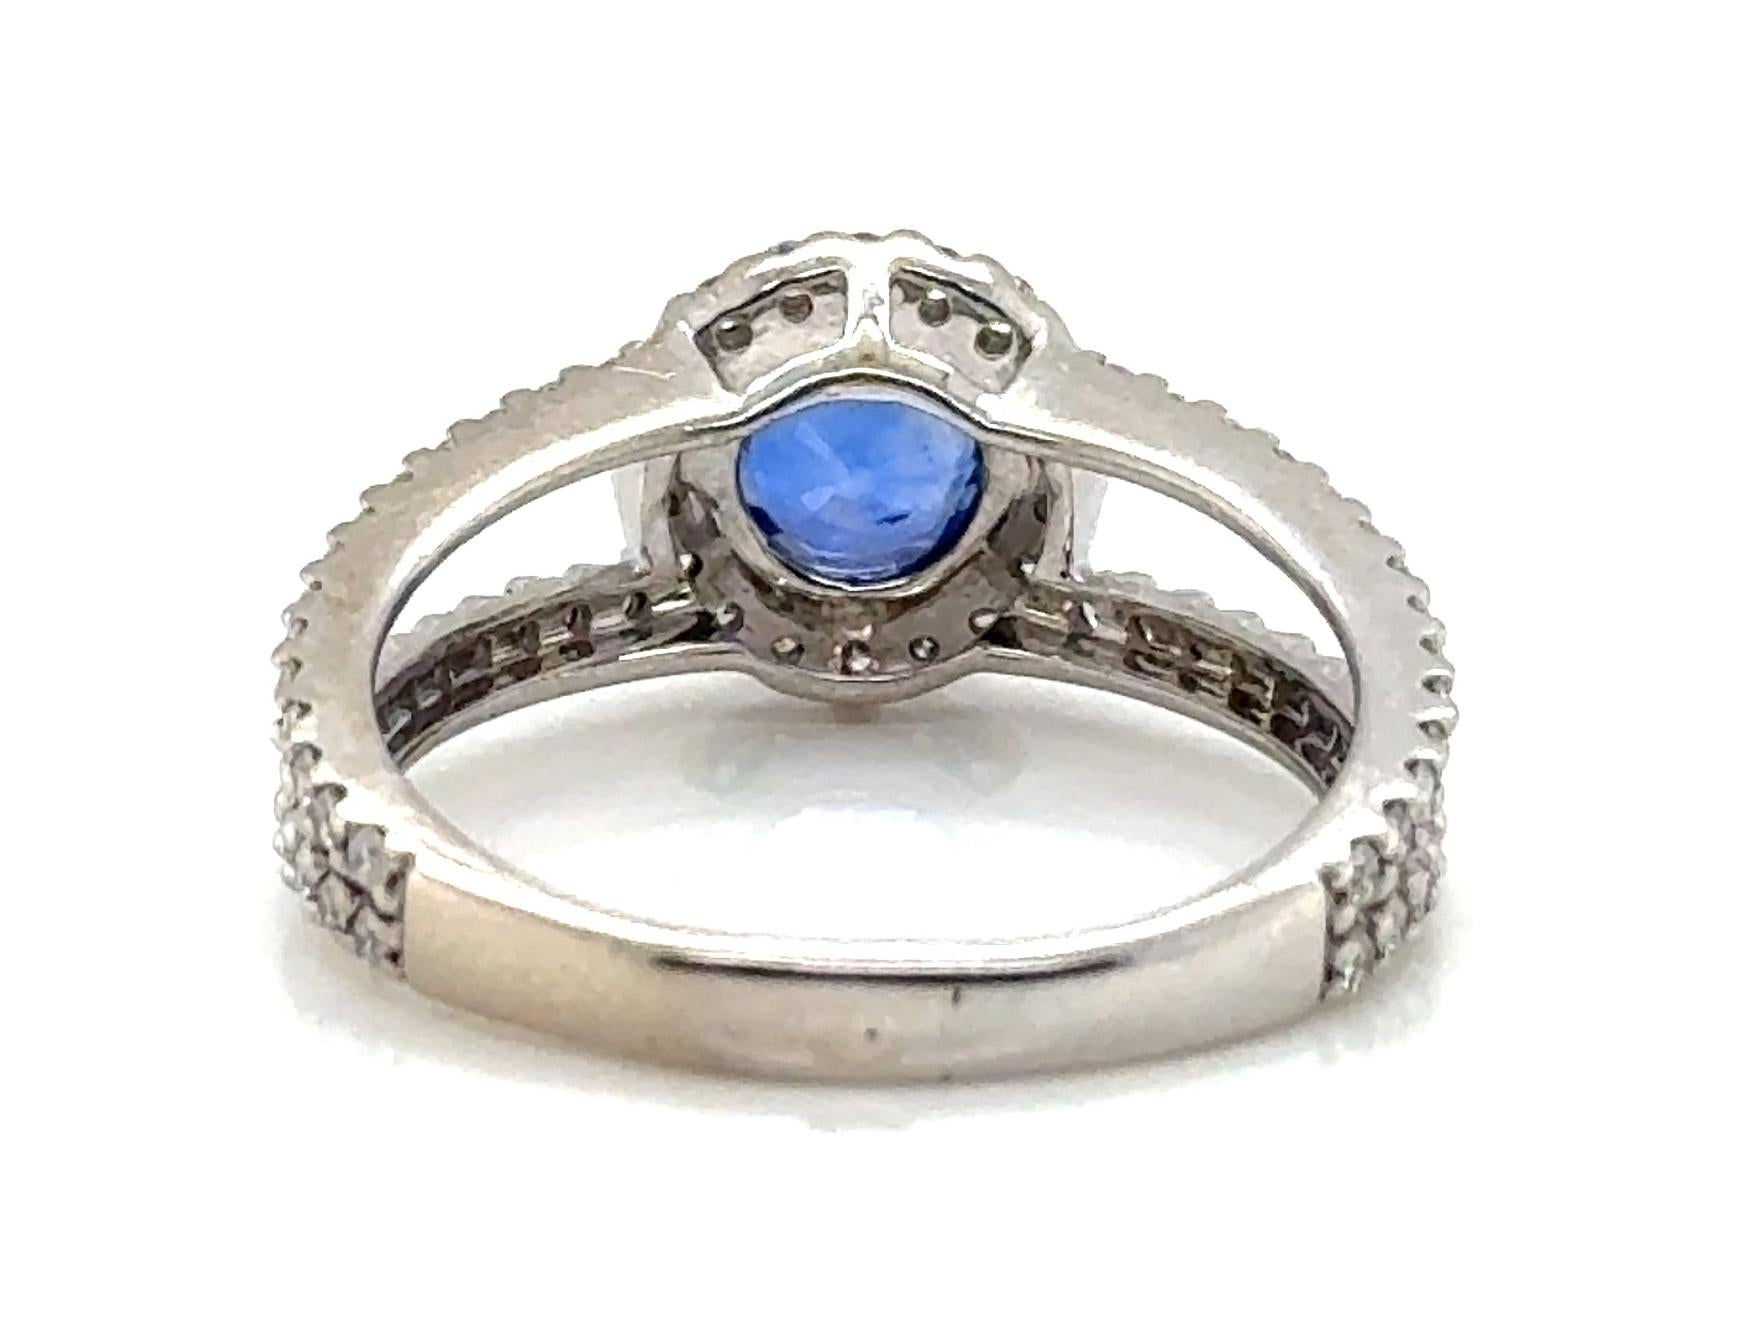 Sapphire Diamond Engagement Ring 2.12ct Split Shank 14K White Gold Birthstone In Excellent Condition For Sale In Dearborn, MI